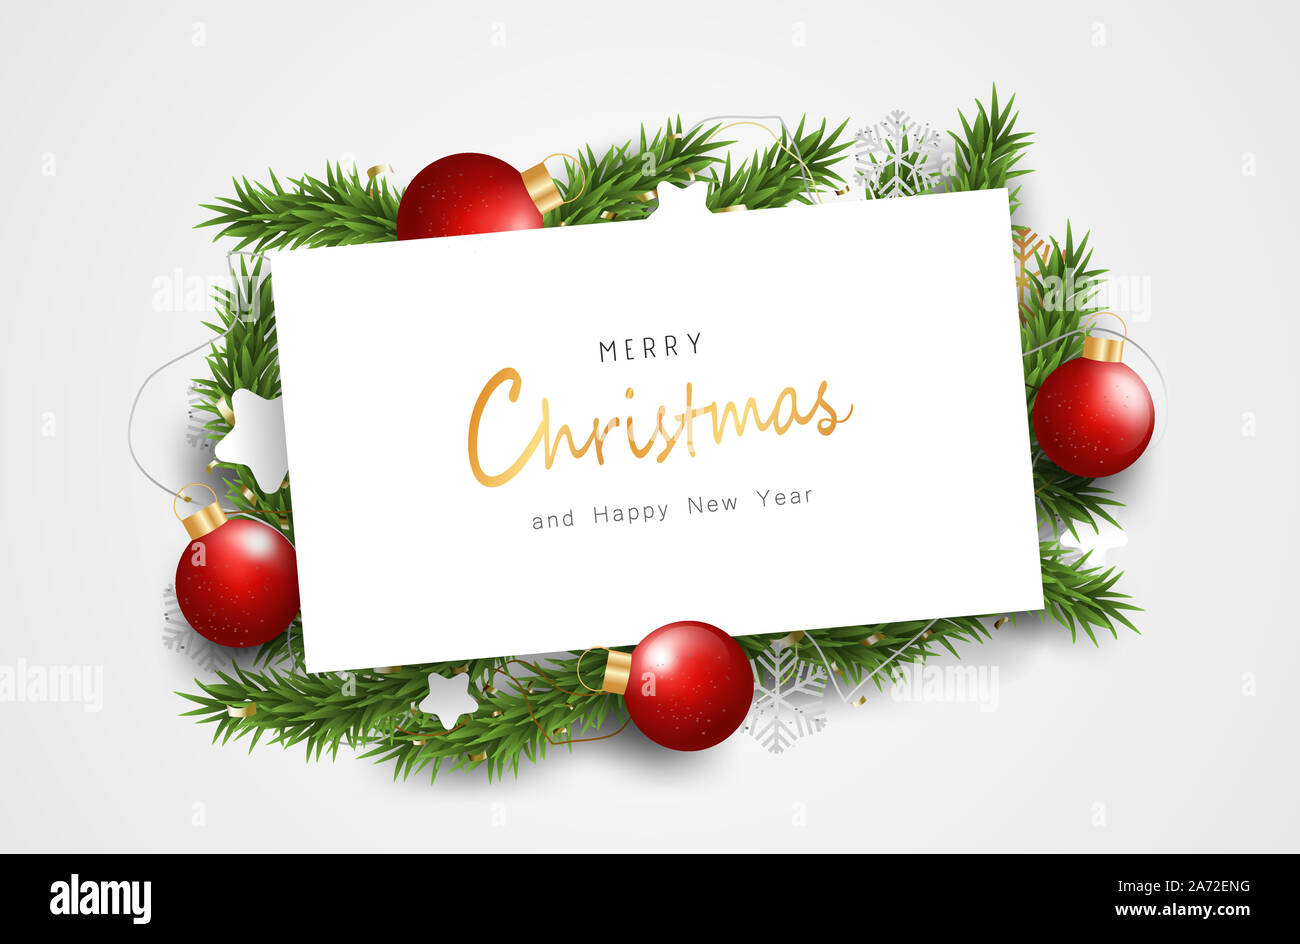 Merry Christmas and Happy New Year on white sign. Clean Background With Typography and Elements. Stock Photo